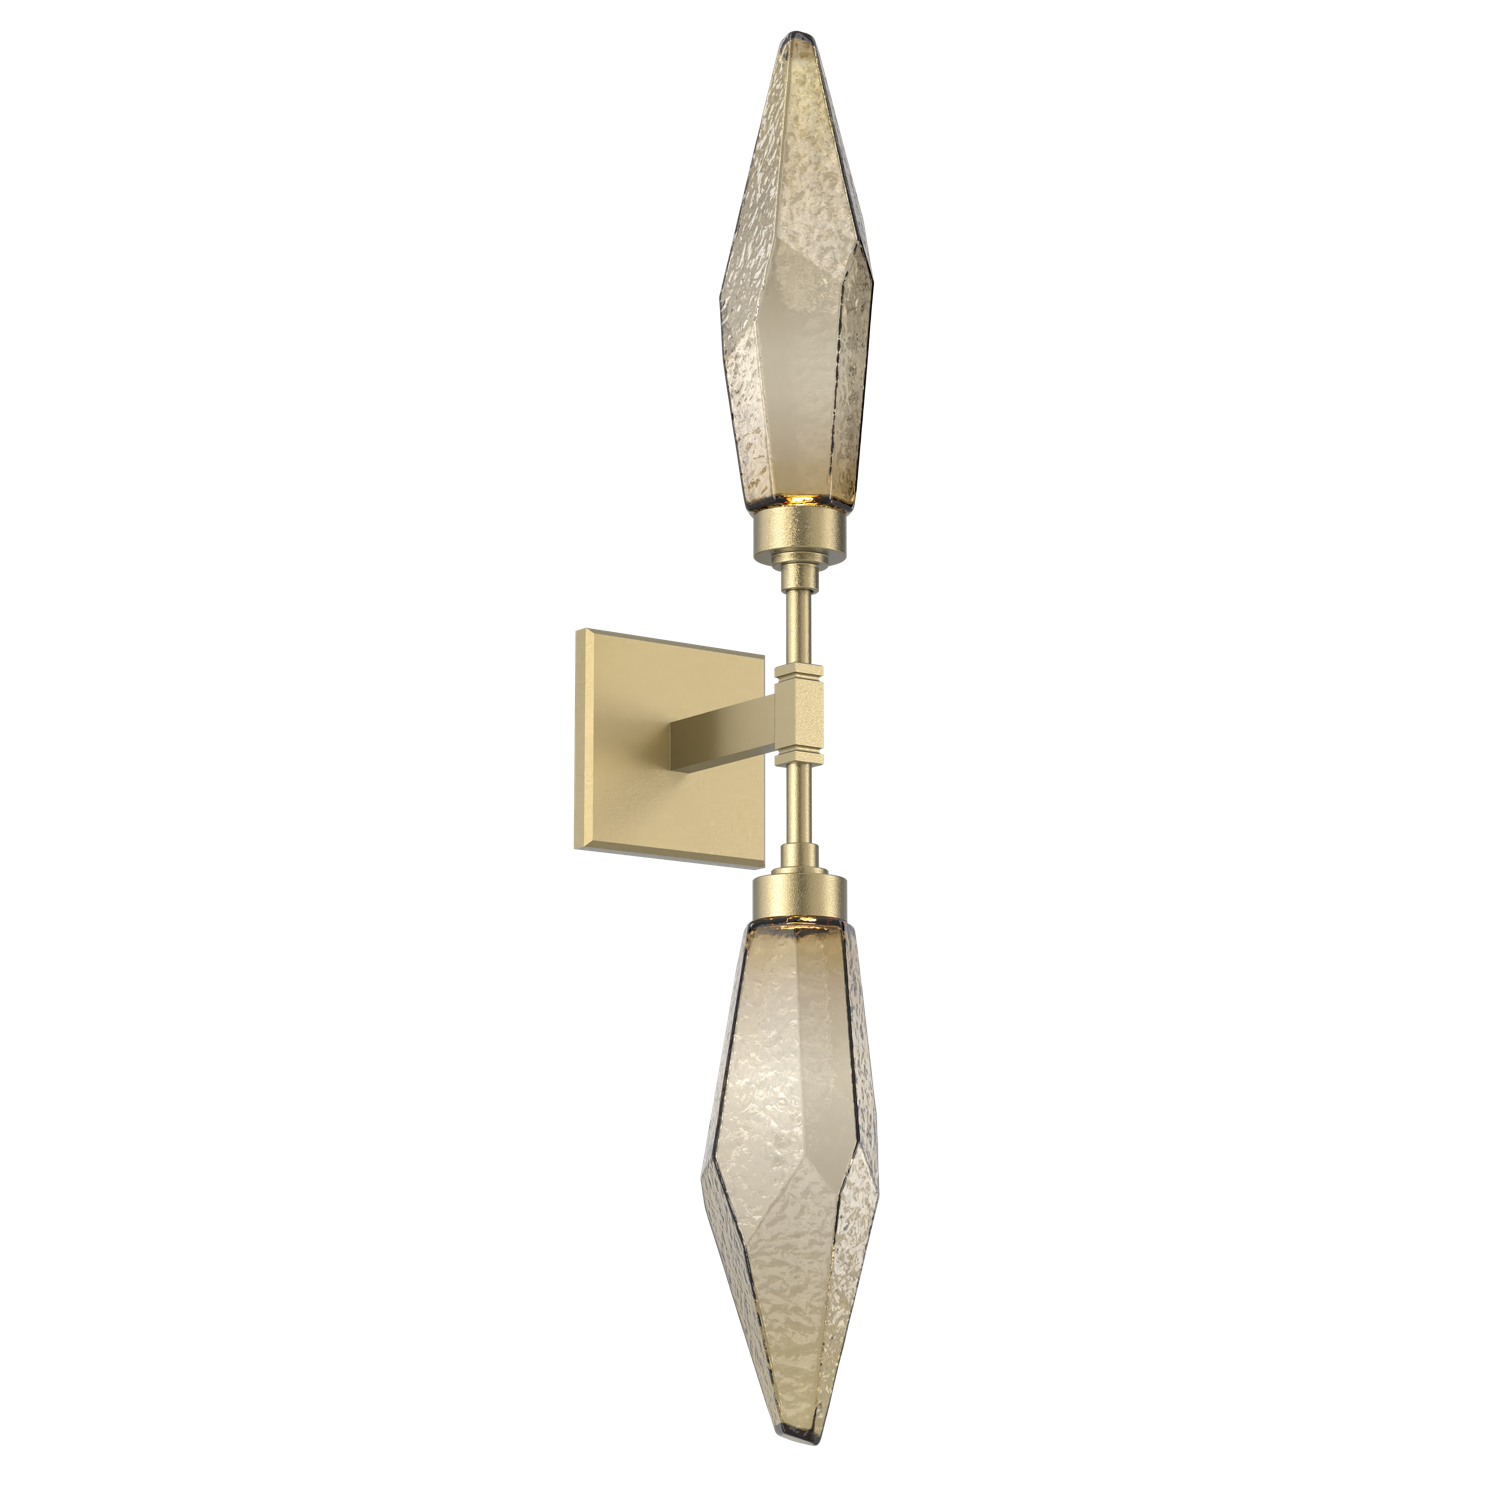 IDB0050-02-GB-CB-Hammerton-Studio-Rock-Crystal-wall-sconce-with-gilded-brass-finish-and-chilled-bronze-blown-glass-shades-and-LED-lamping